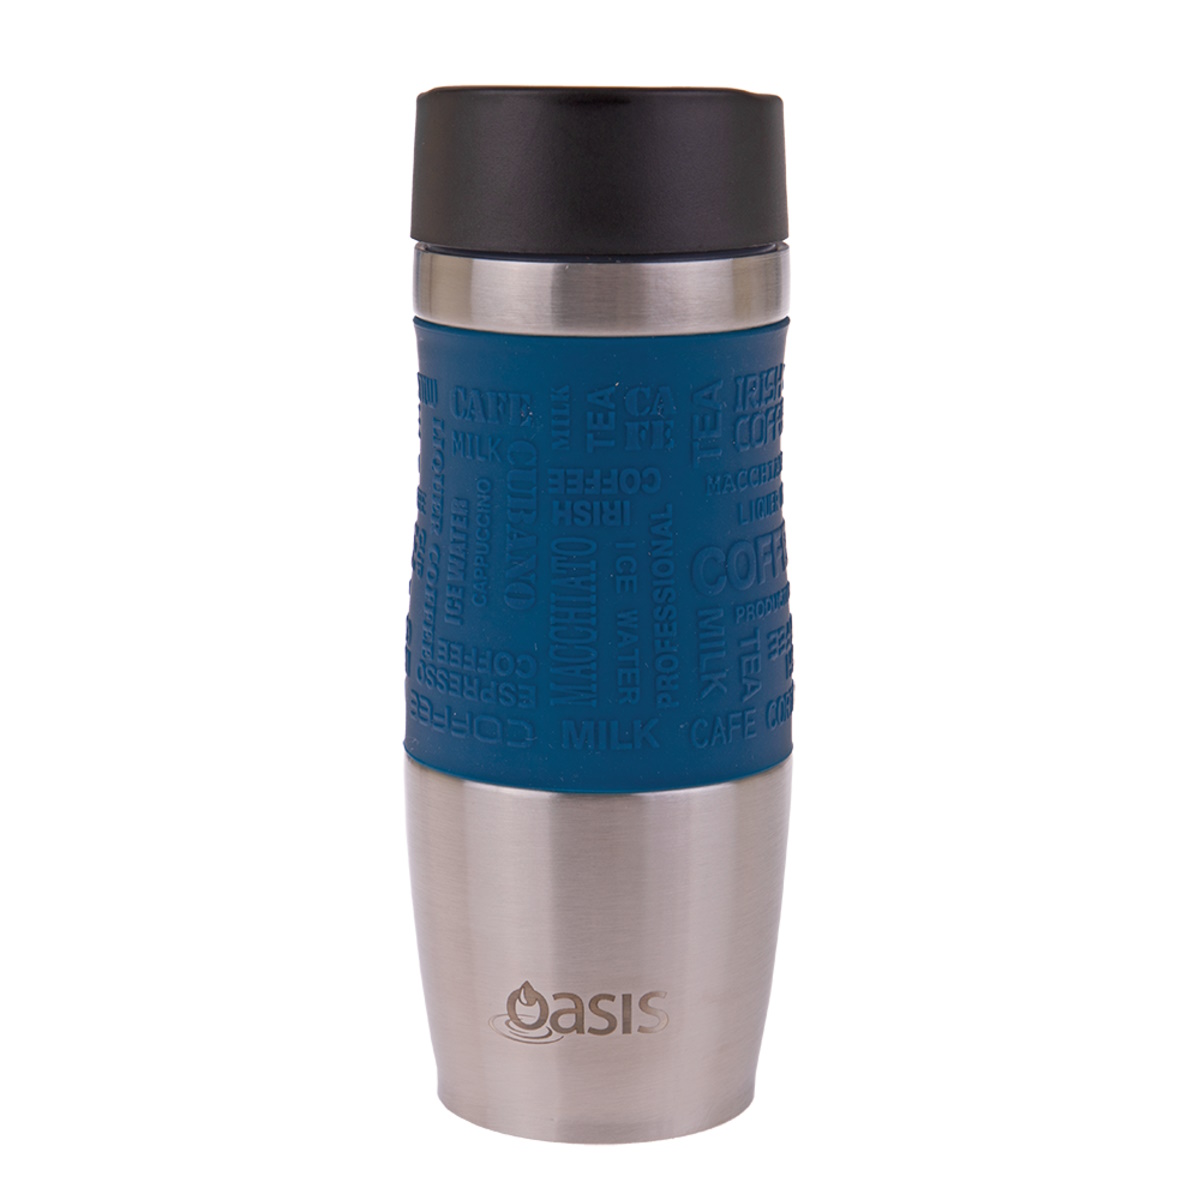 Oasis Café Stainless Steel Double Wall Insulated Travel Mug 380ml Navy